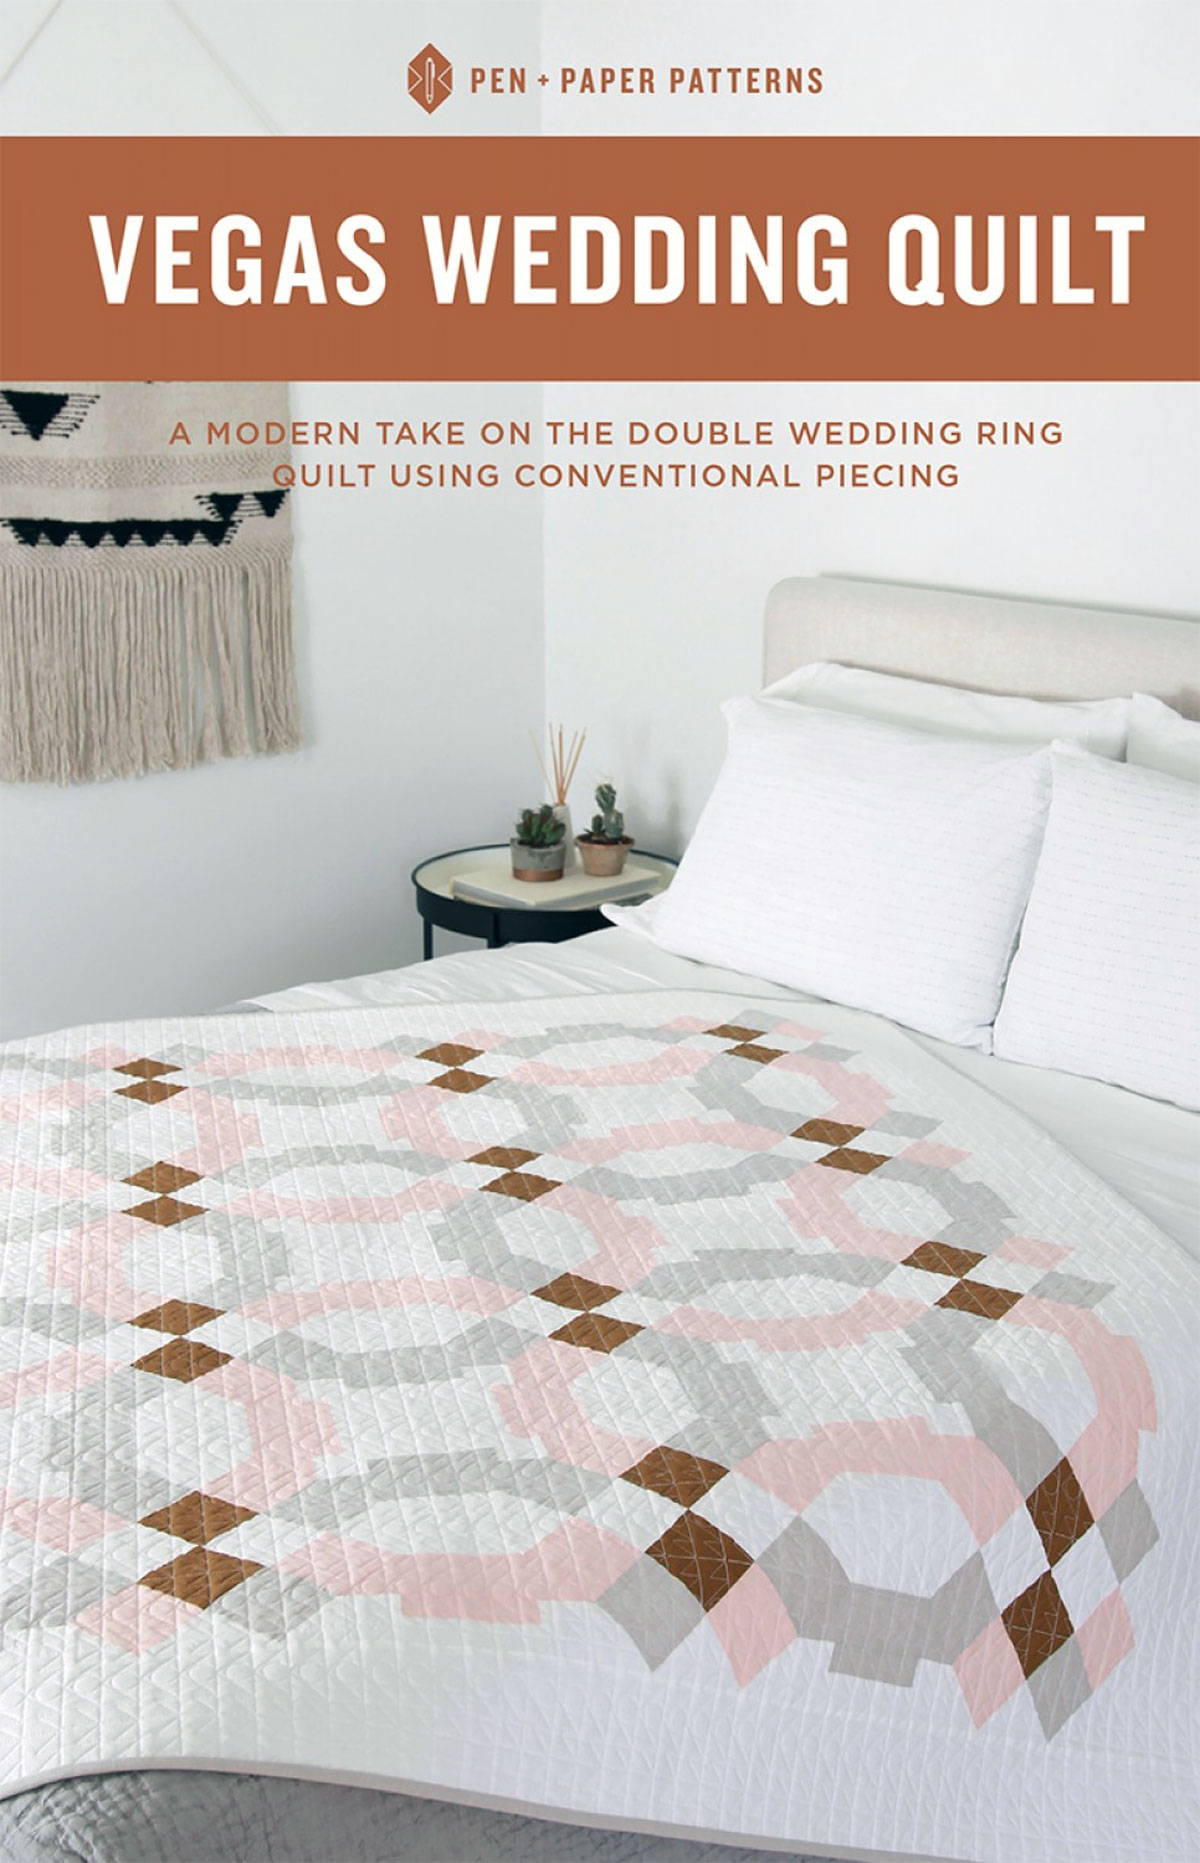 Vegas-Wedding-quilt-sewing-pattern-from-Pen-plus-paper-patterns-front